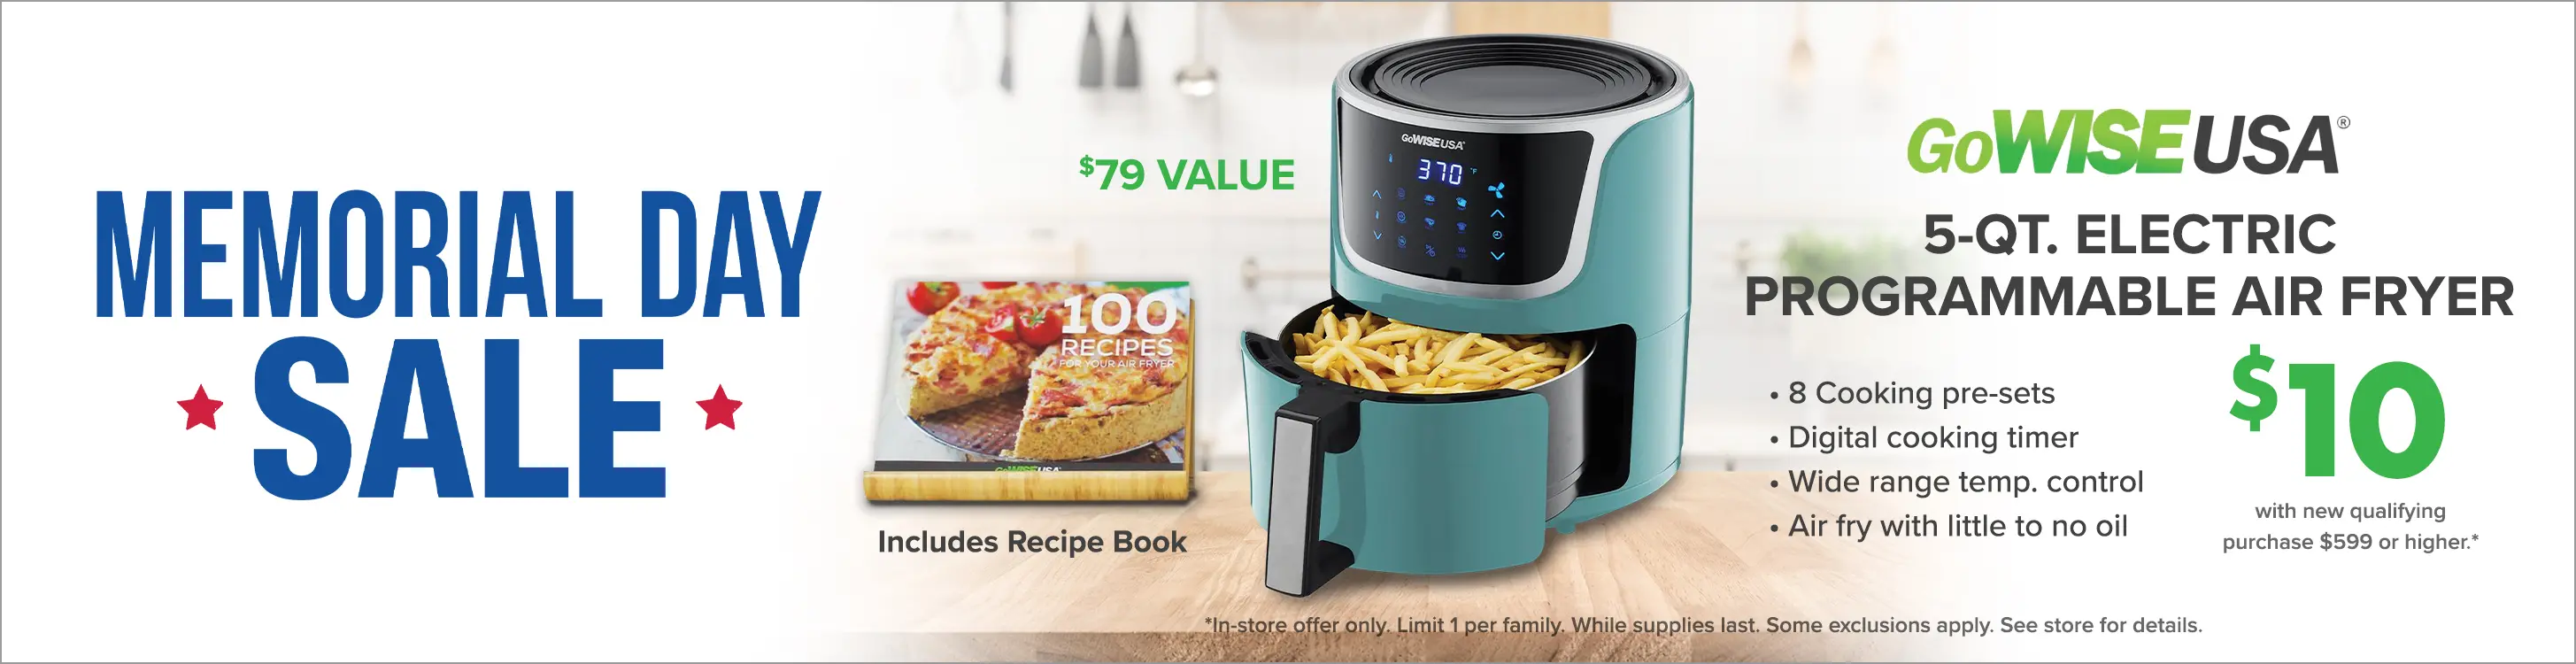 Get an Air Fryer for $10 with a new qualifying purchase of $599 or higher for a limited time only. In Store Offer Only.